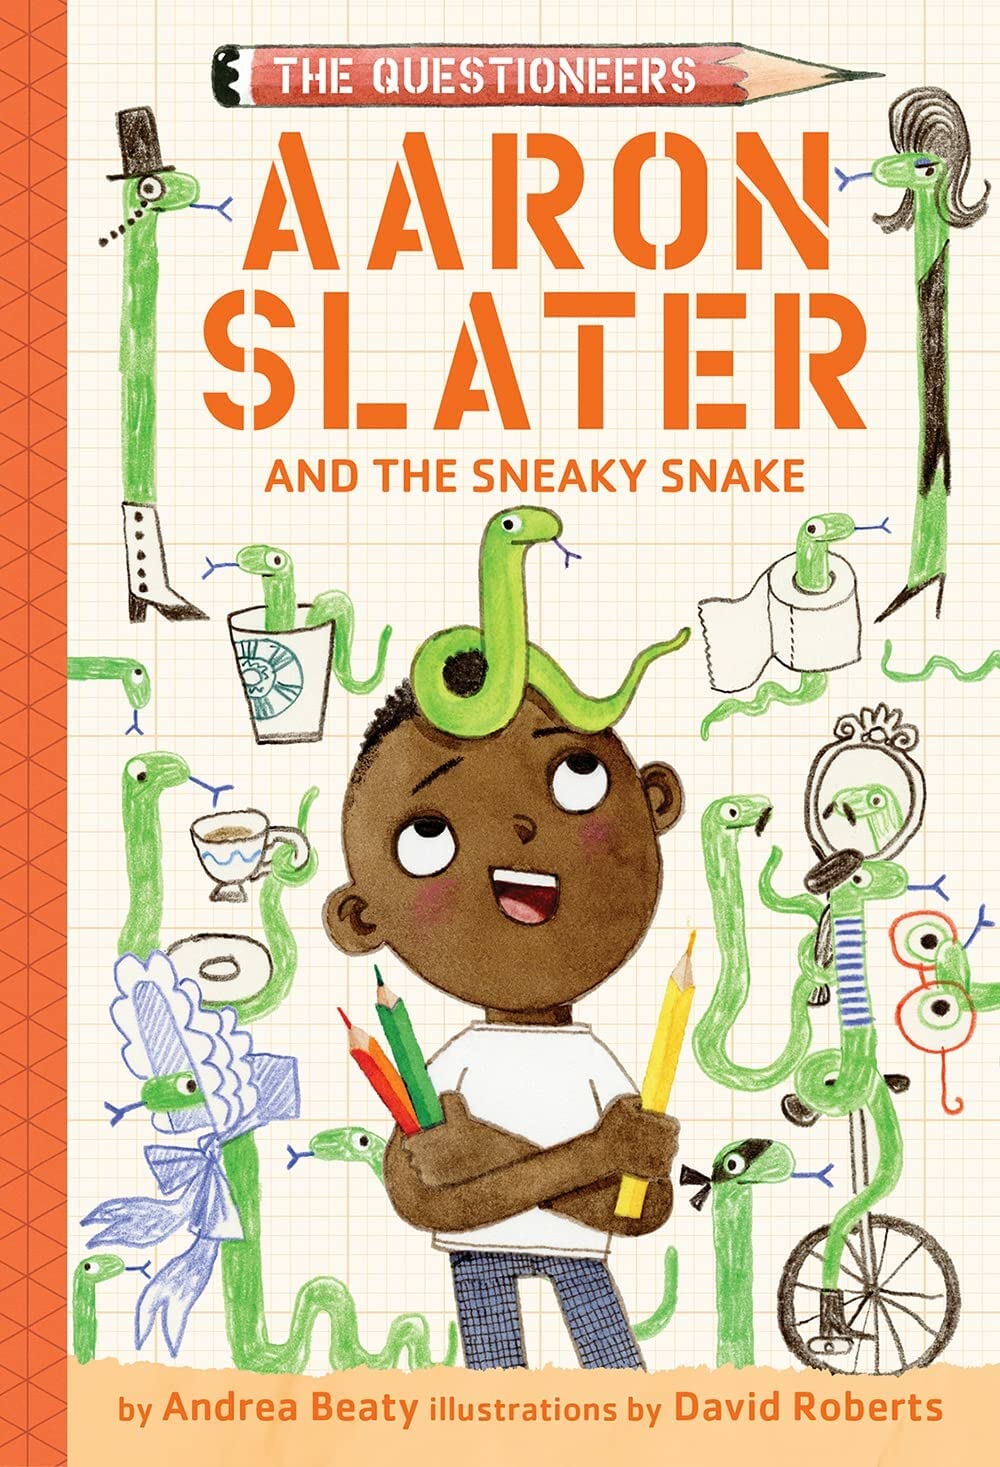 Aaron Slater and the Sneaky Snake : Book 6 of 6: The Questioneers (hardcover)  Andrea Beaty